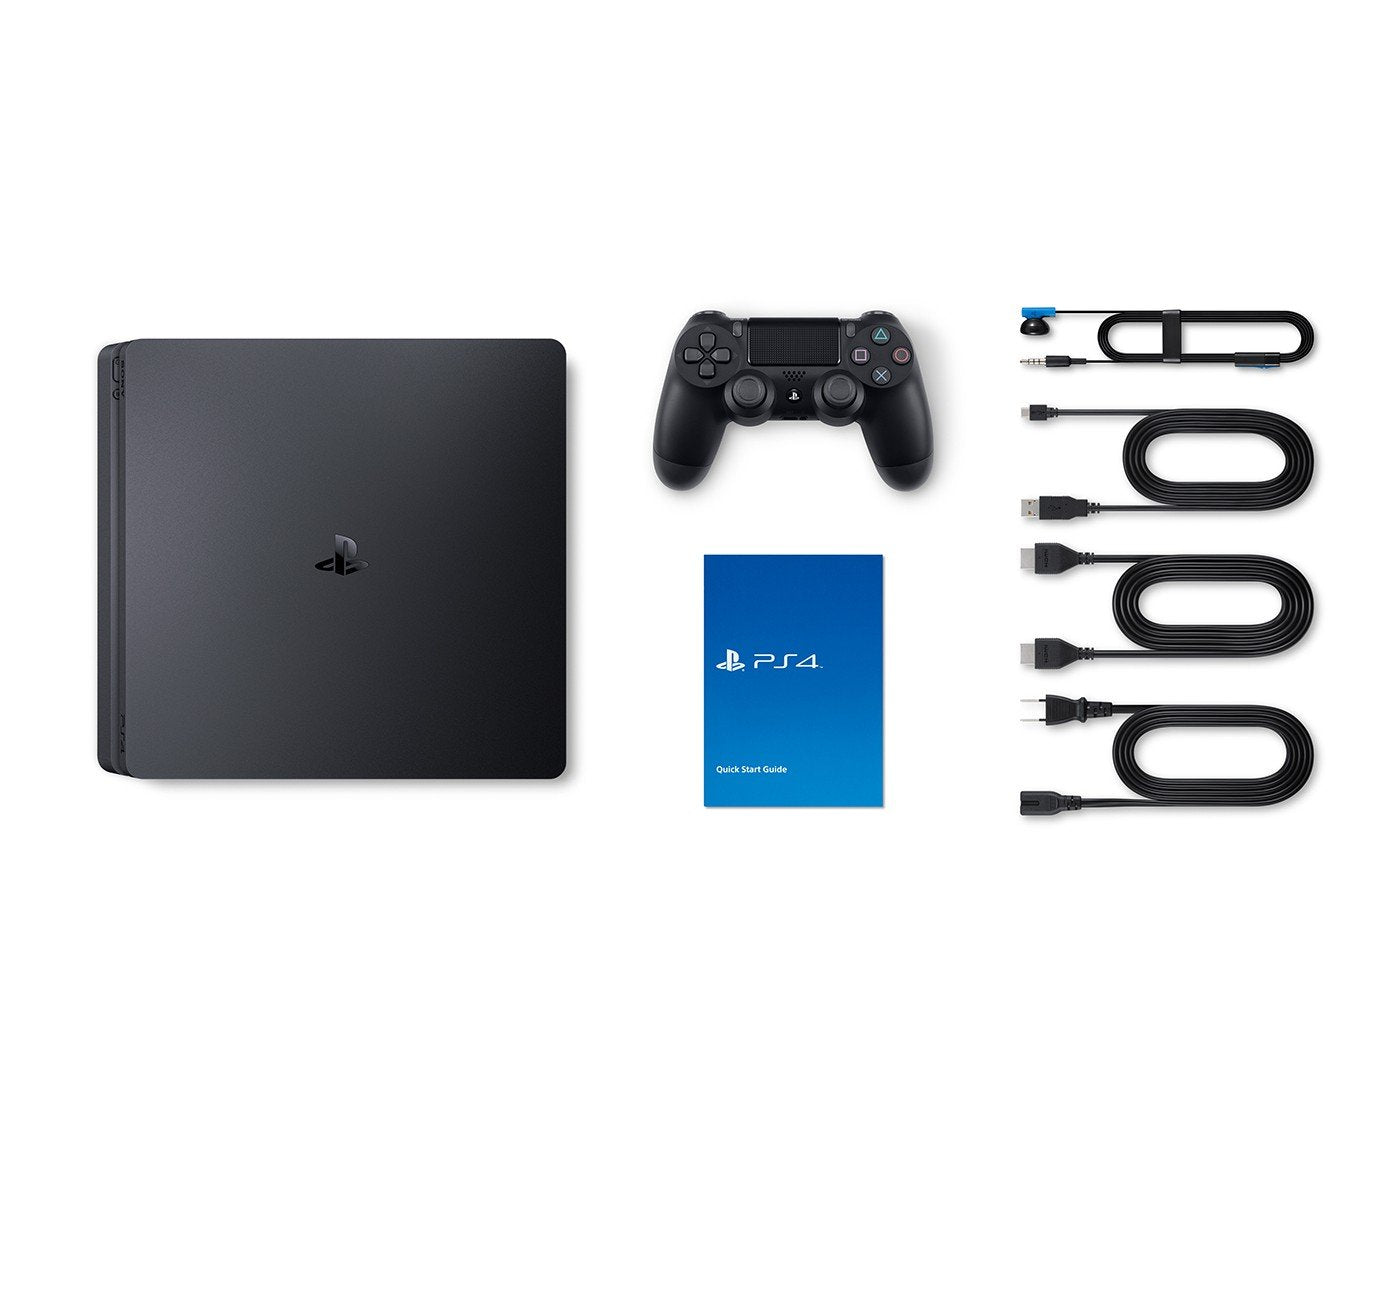 PlayStation 4 1TB Console with Ghost of Tsushima - PS4 Slim 1TB Jet Black HDR Gaming Console, Wireless Controller and Game